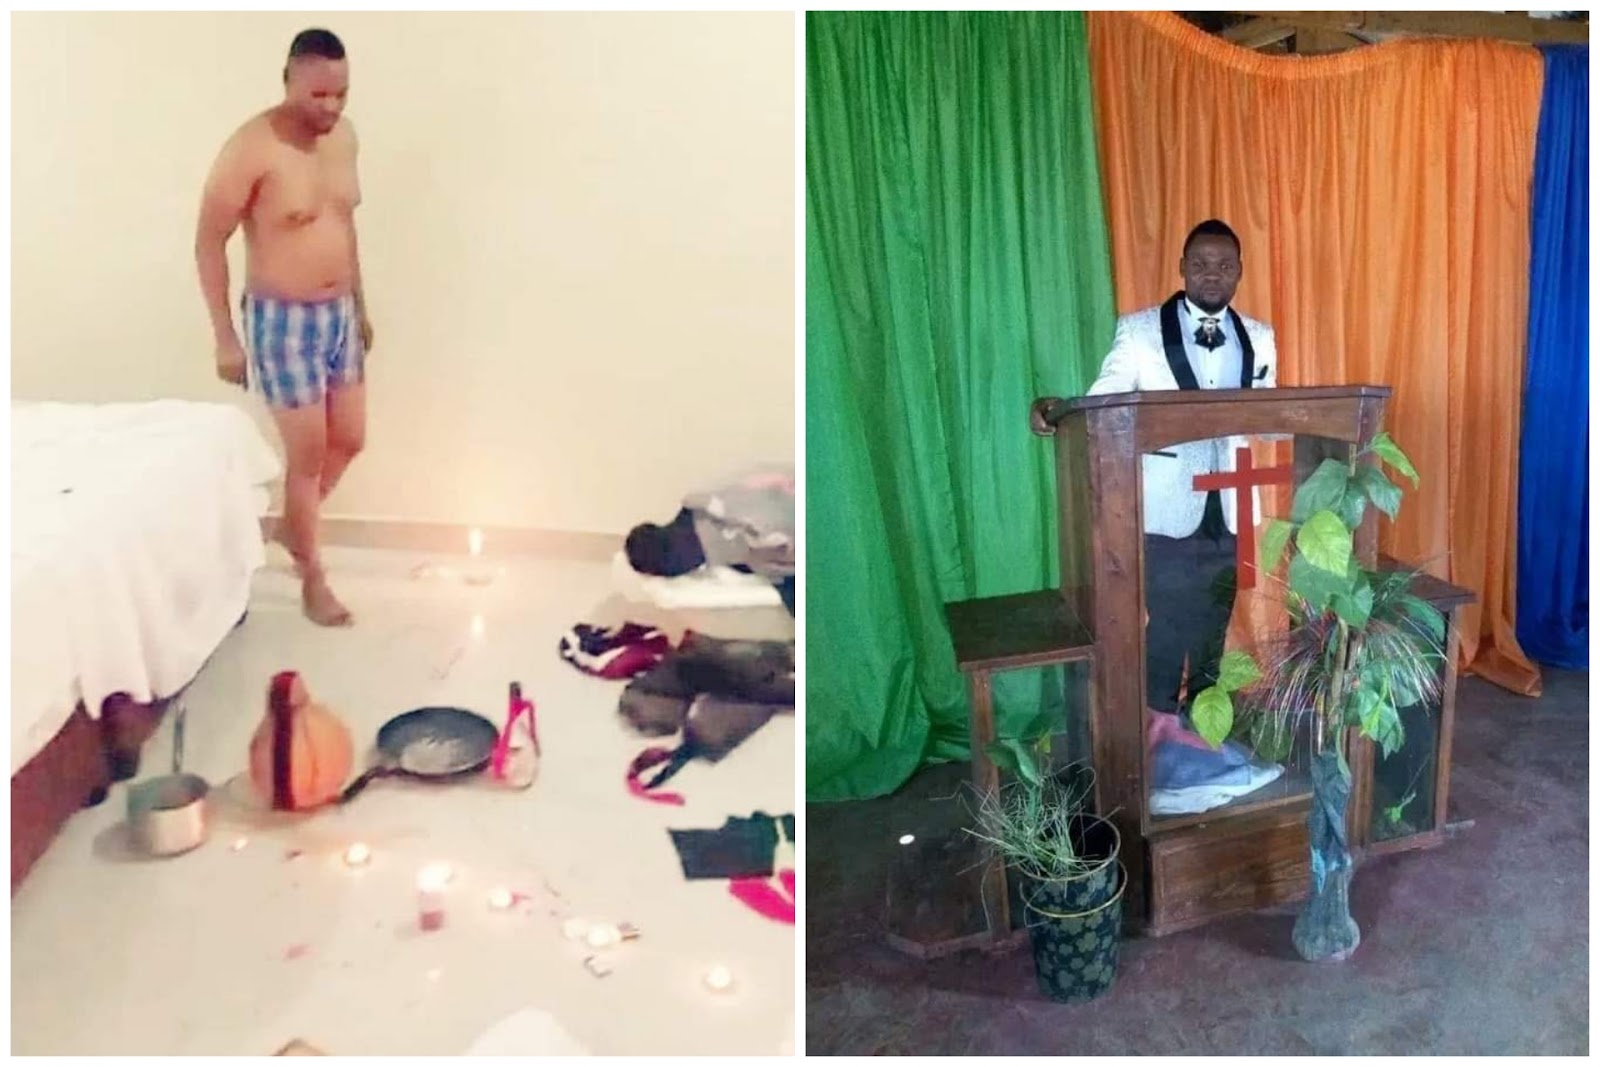 Red Handed Waifs Sex Full Videos - LEAKED SEXTAPE: Pregnant woman, Martha, told her husband she was going to  Kitwe before being caught red-handed sleeping with ritualist fake pastor,  Piercy Enoch Peterz, on matrimonial bed in viral sex video